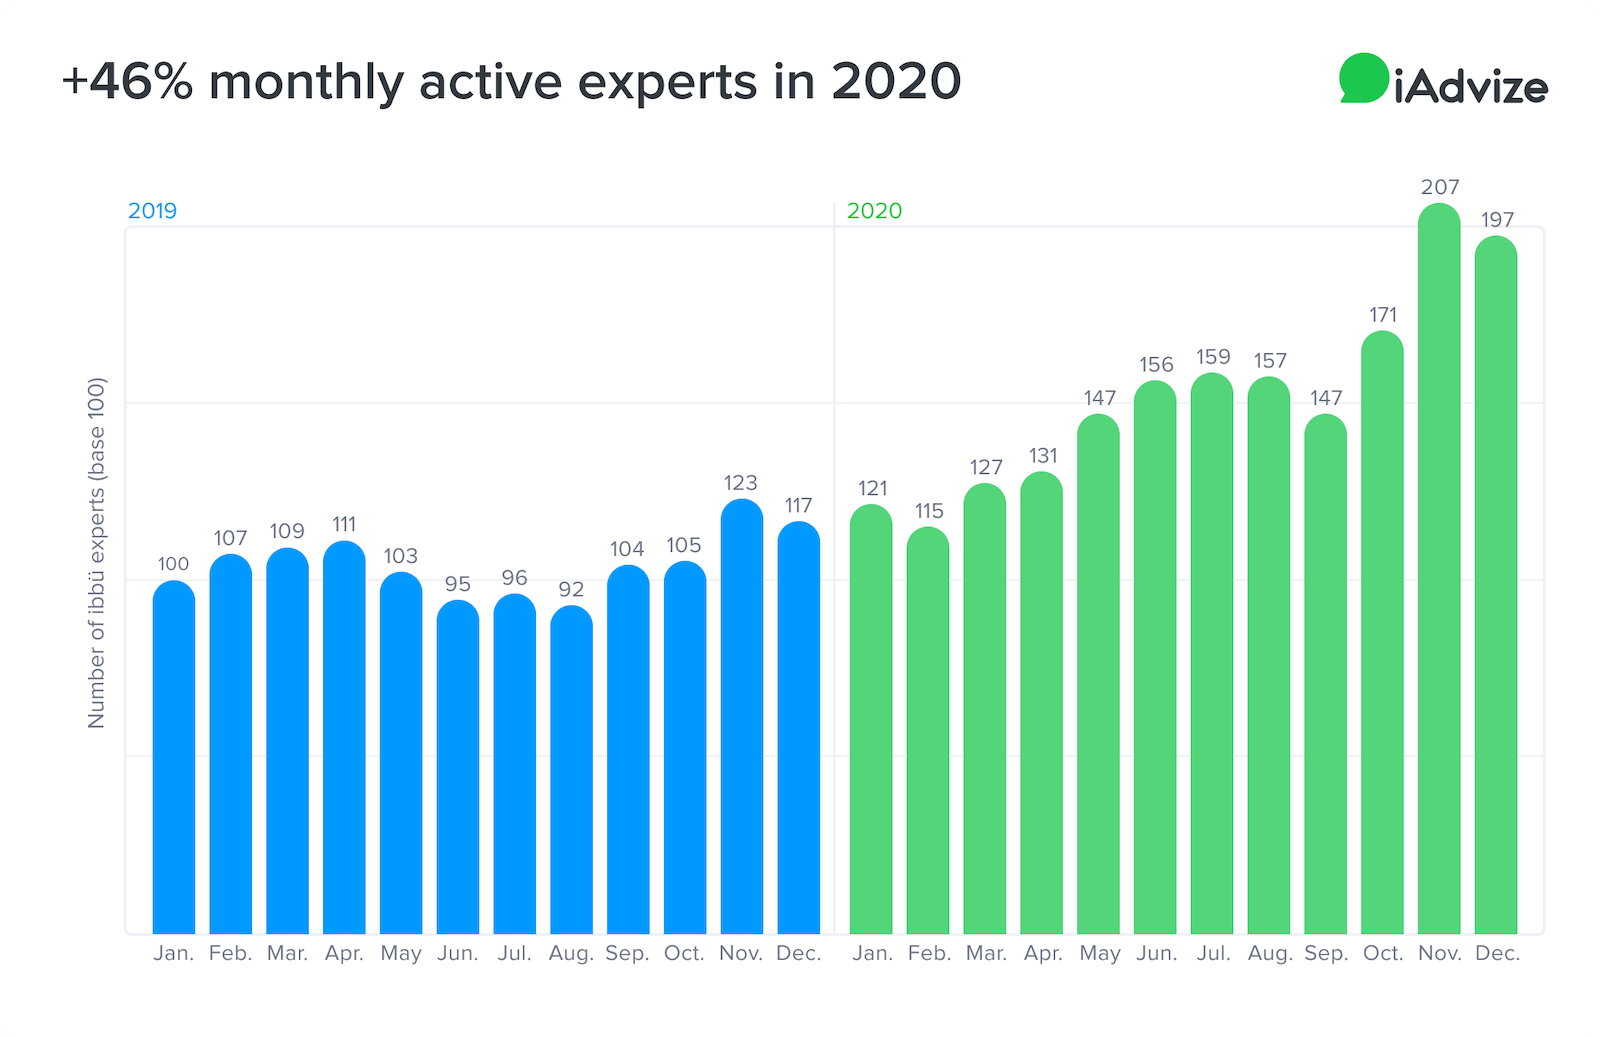 +46% more active experts per month in 2020